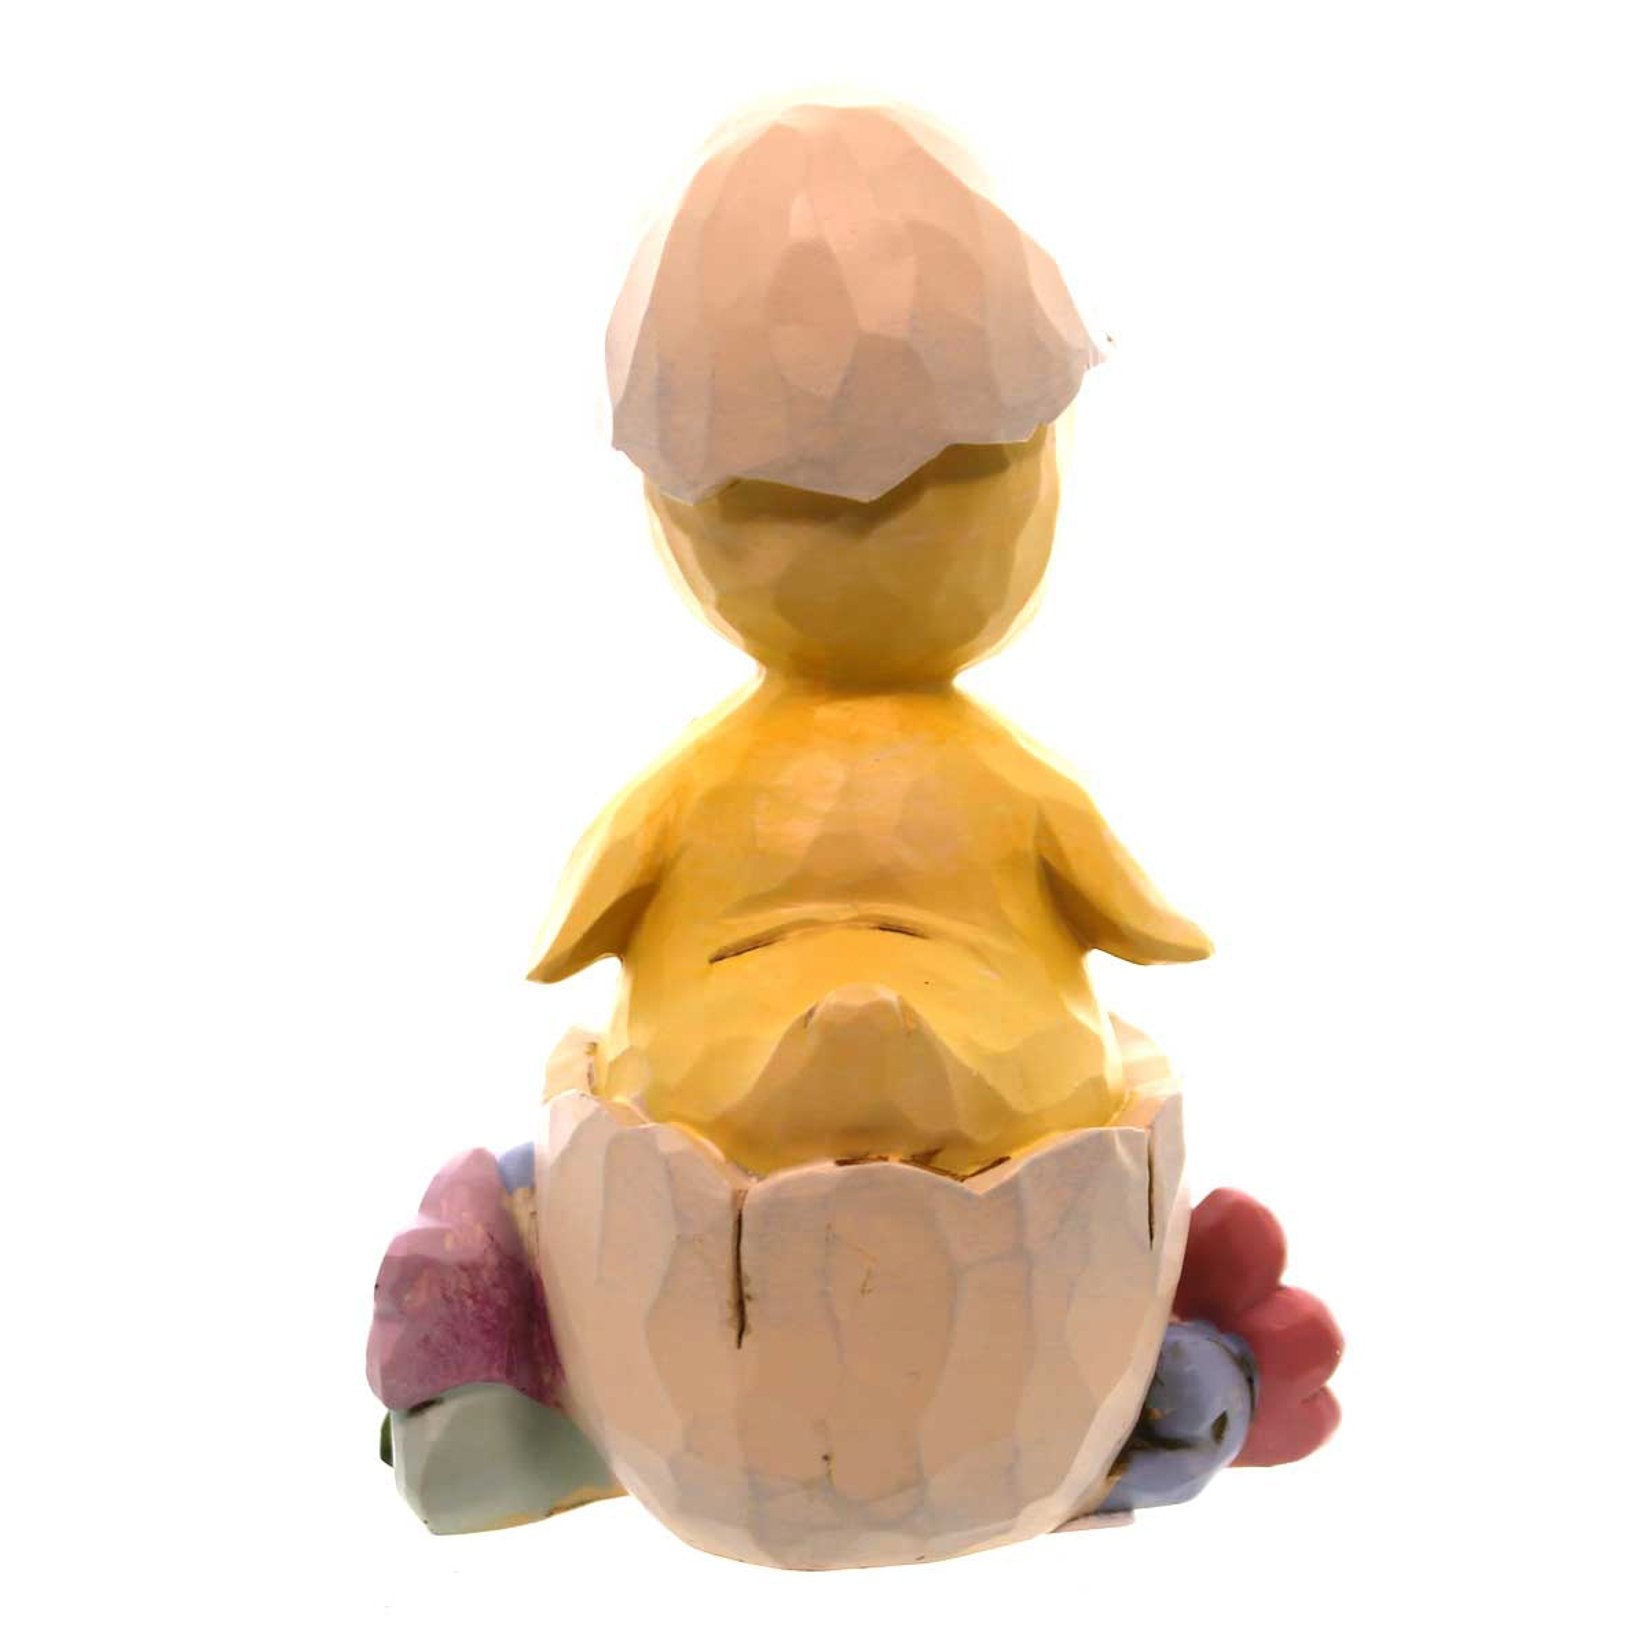 Jim Shore Heartwood Creek A Crack Up Pint Sized Easter Chick in Egg Shell Figurine